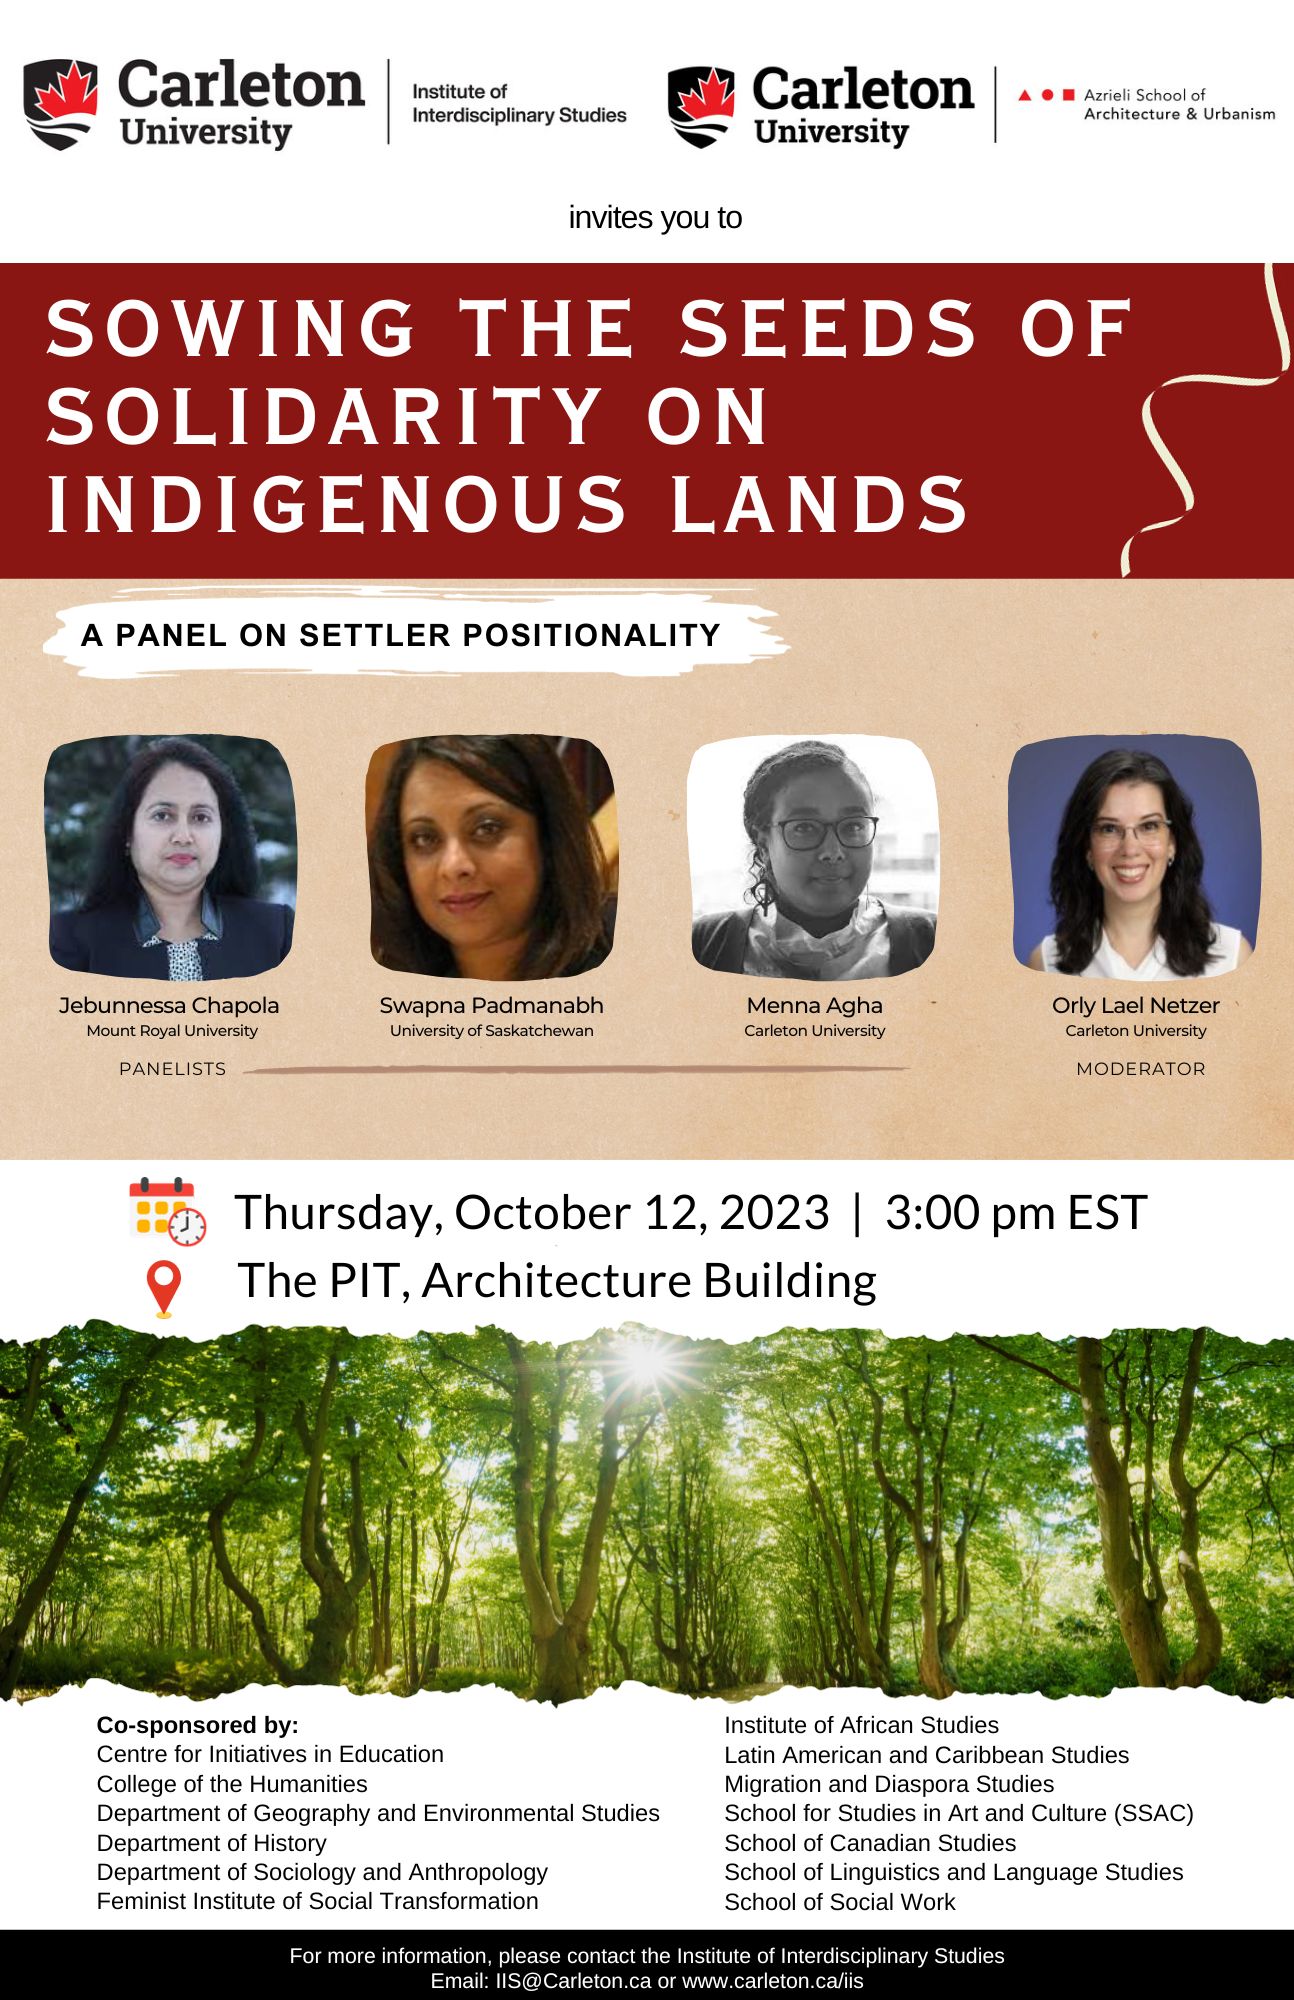 Poster for Sowing the Seeds of Solidarity on Indigenous Lands: A panel discussion on Settler Positionality, listing the guest speakers and sponsors